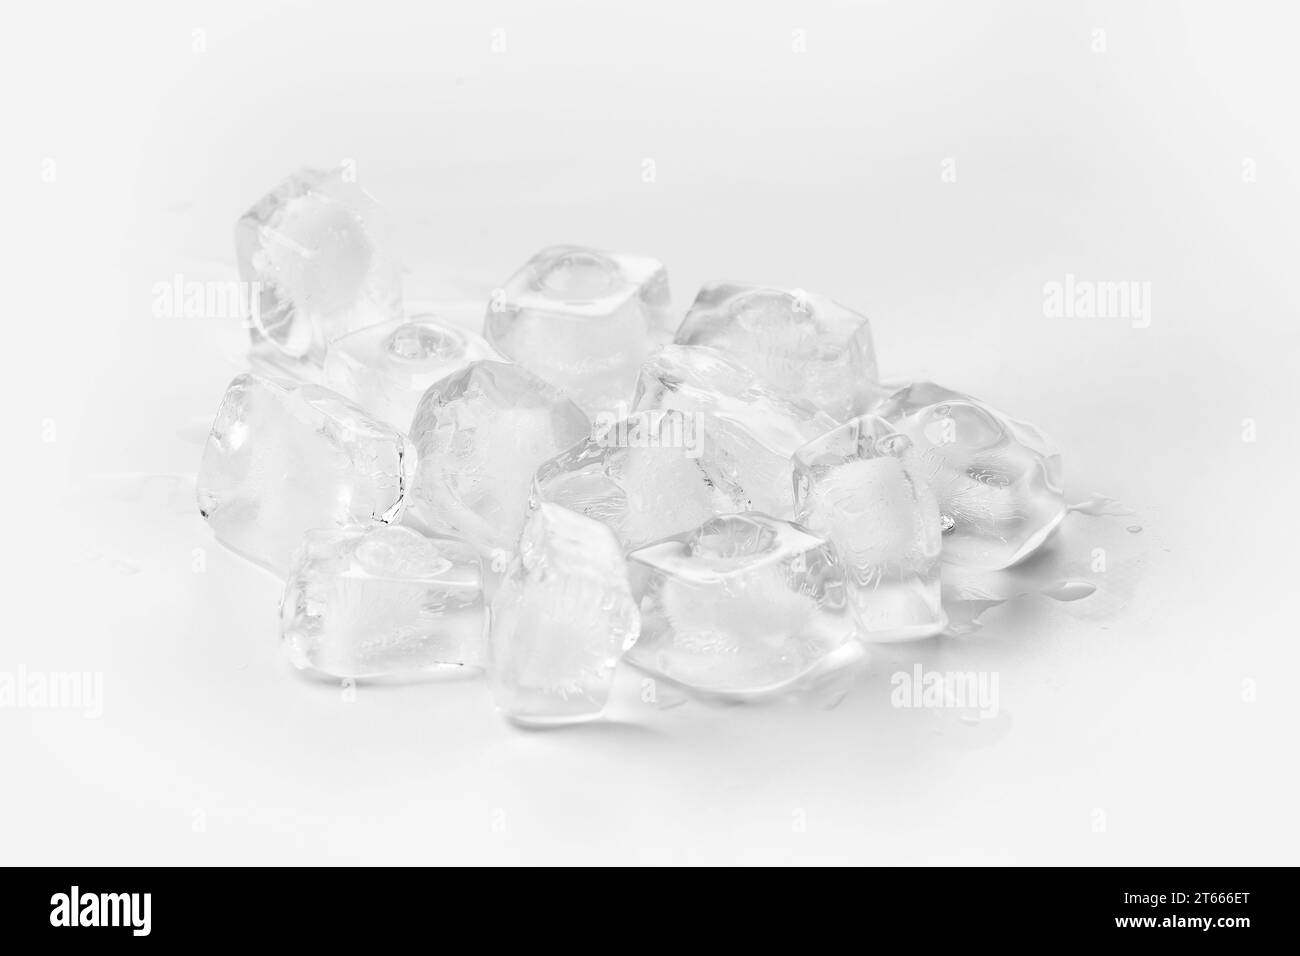 https://c8.alamy.com/comp/2T666ET/ice-cubes-for-drinks-isolated-on-white-background-2T666ET.jpg